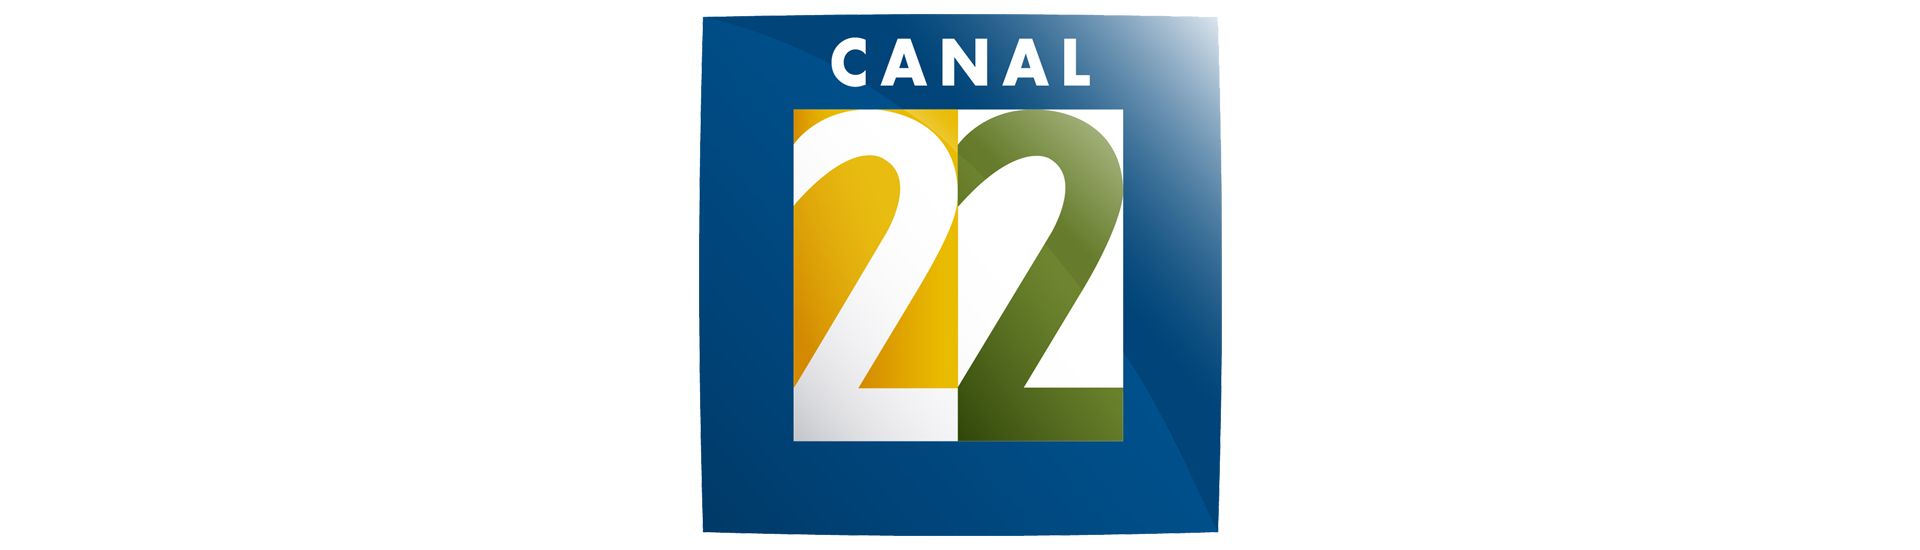 Image for Canal 22